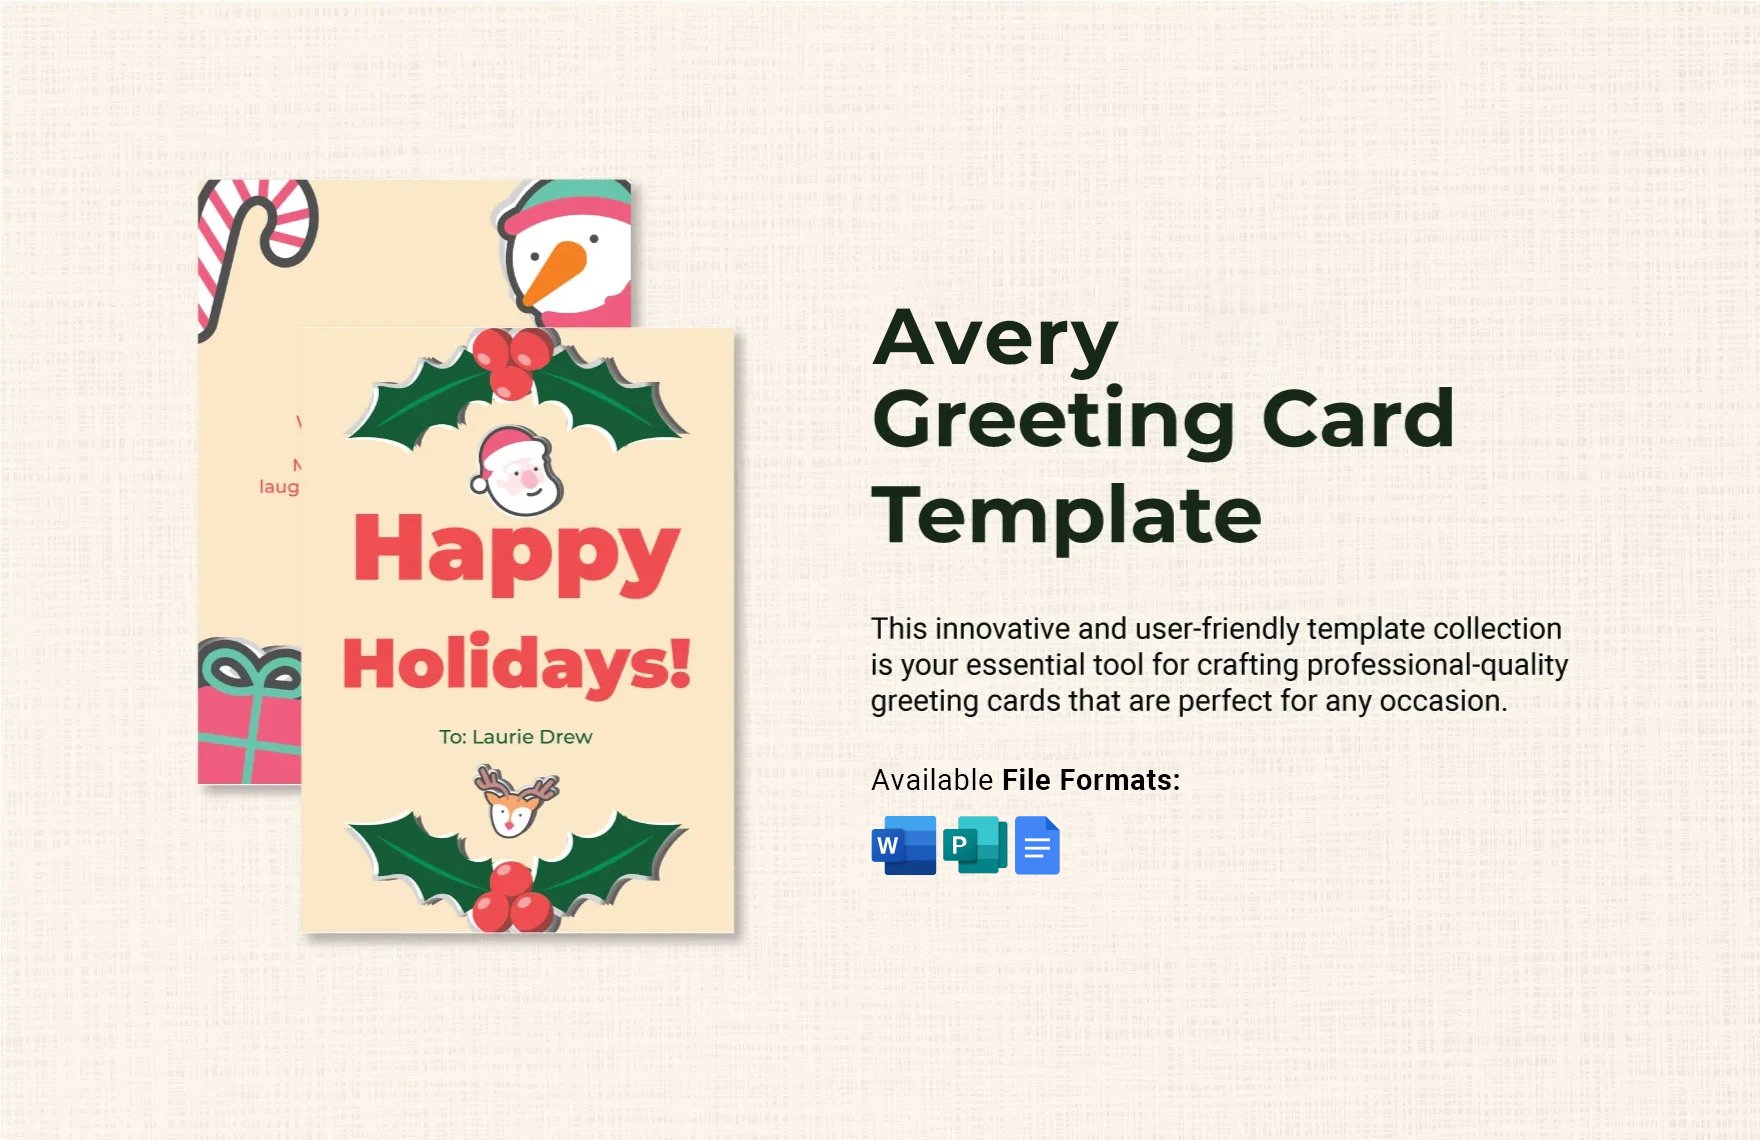 Avery Greeting Card Template in Word, Google Docs, Publisher